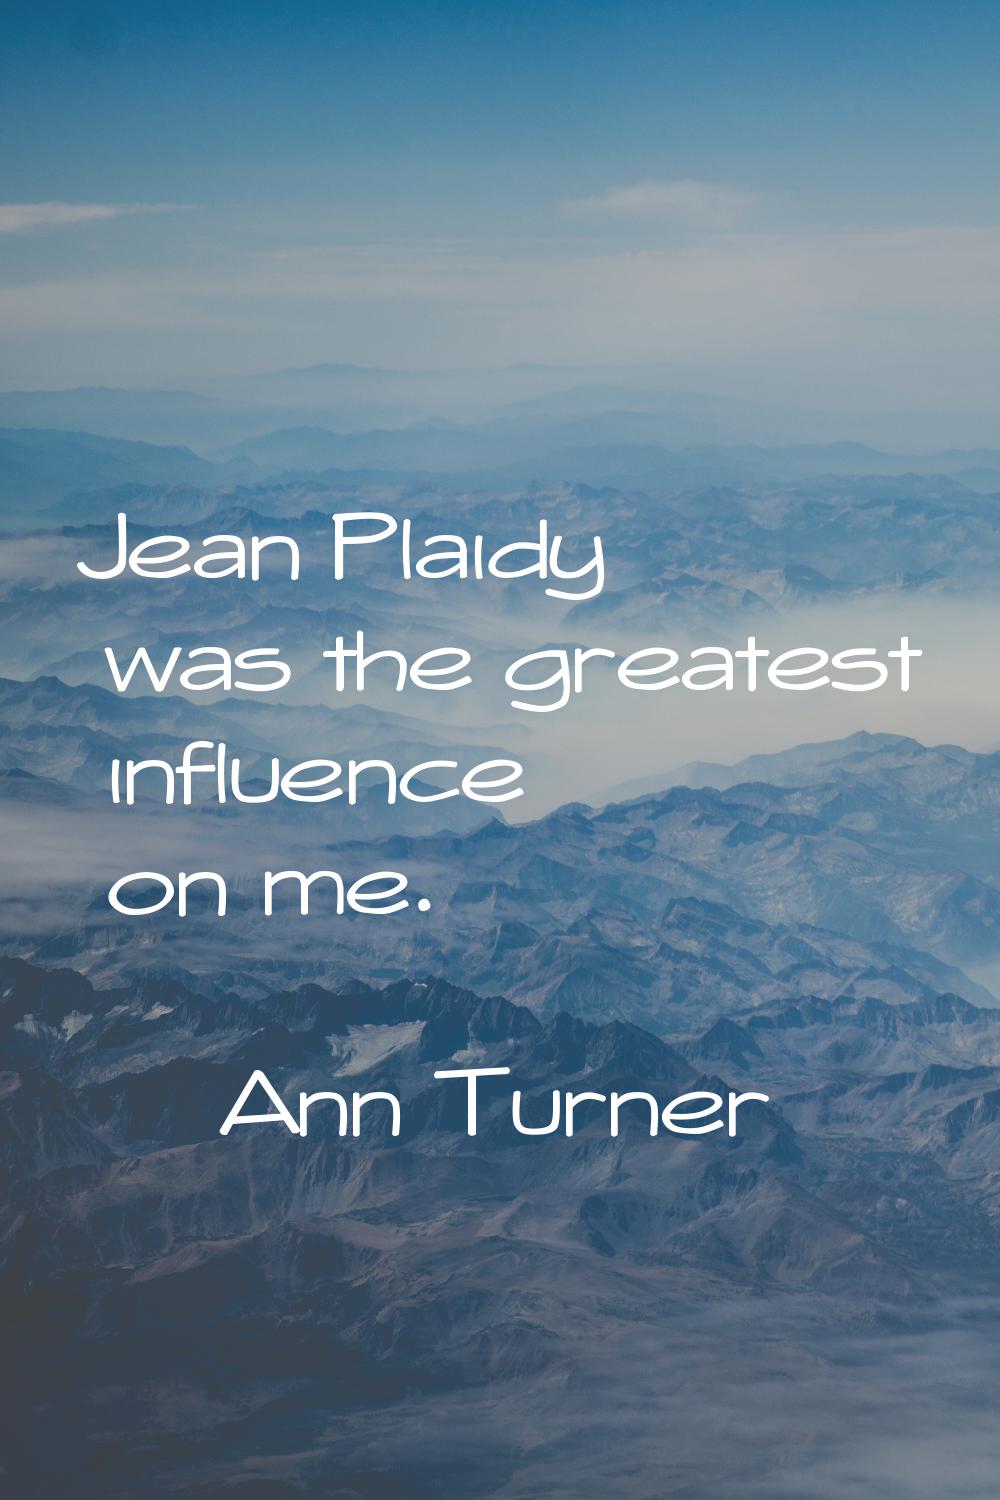 Jean Plaidy was the greatest influence on me.